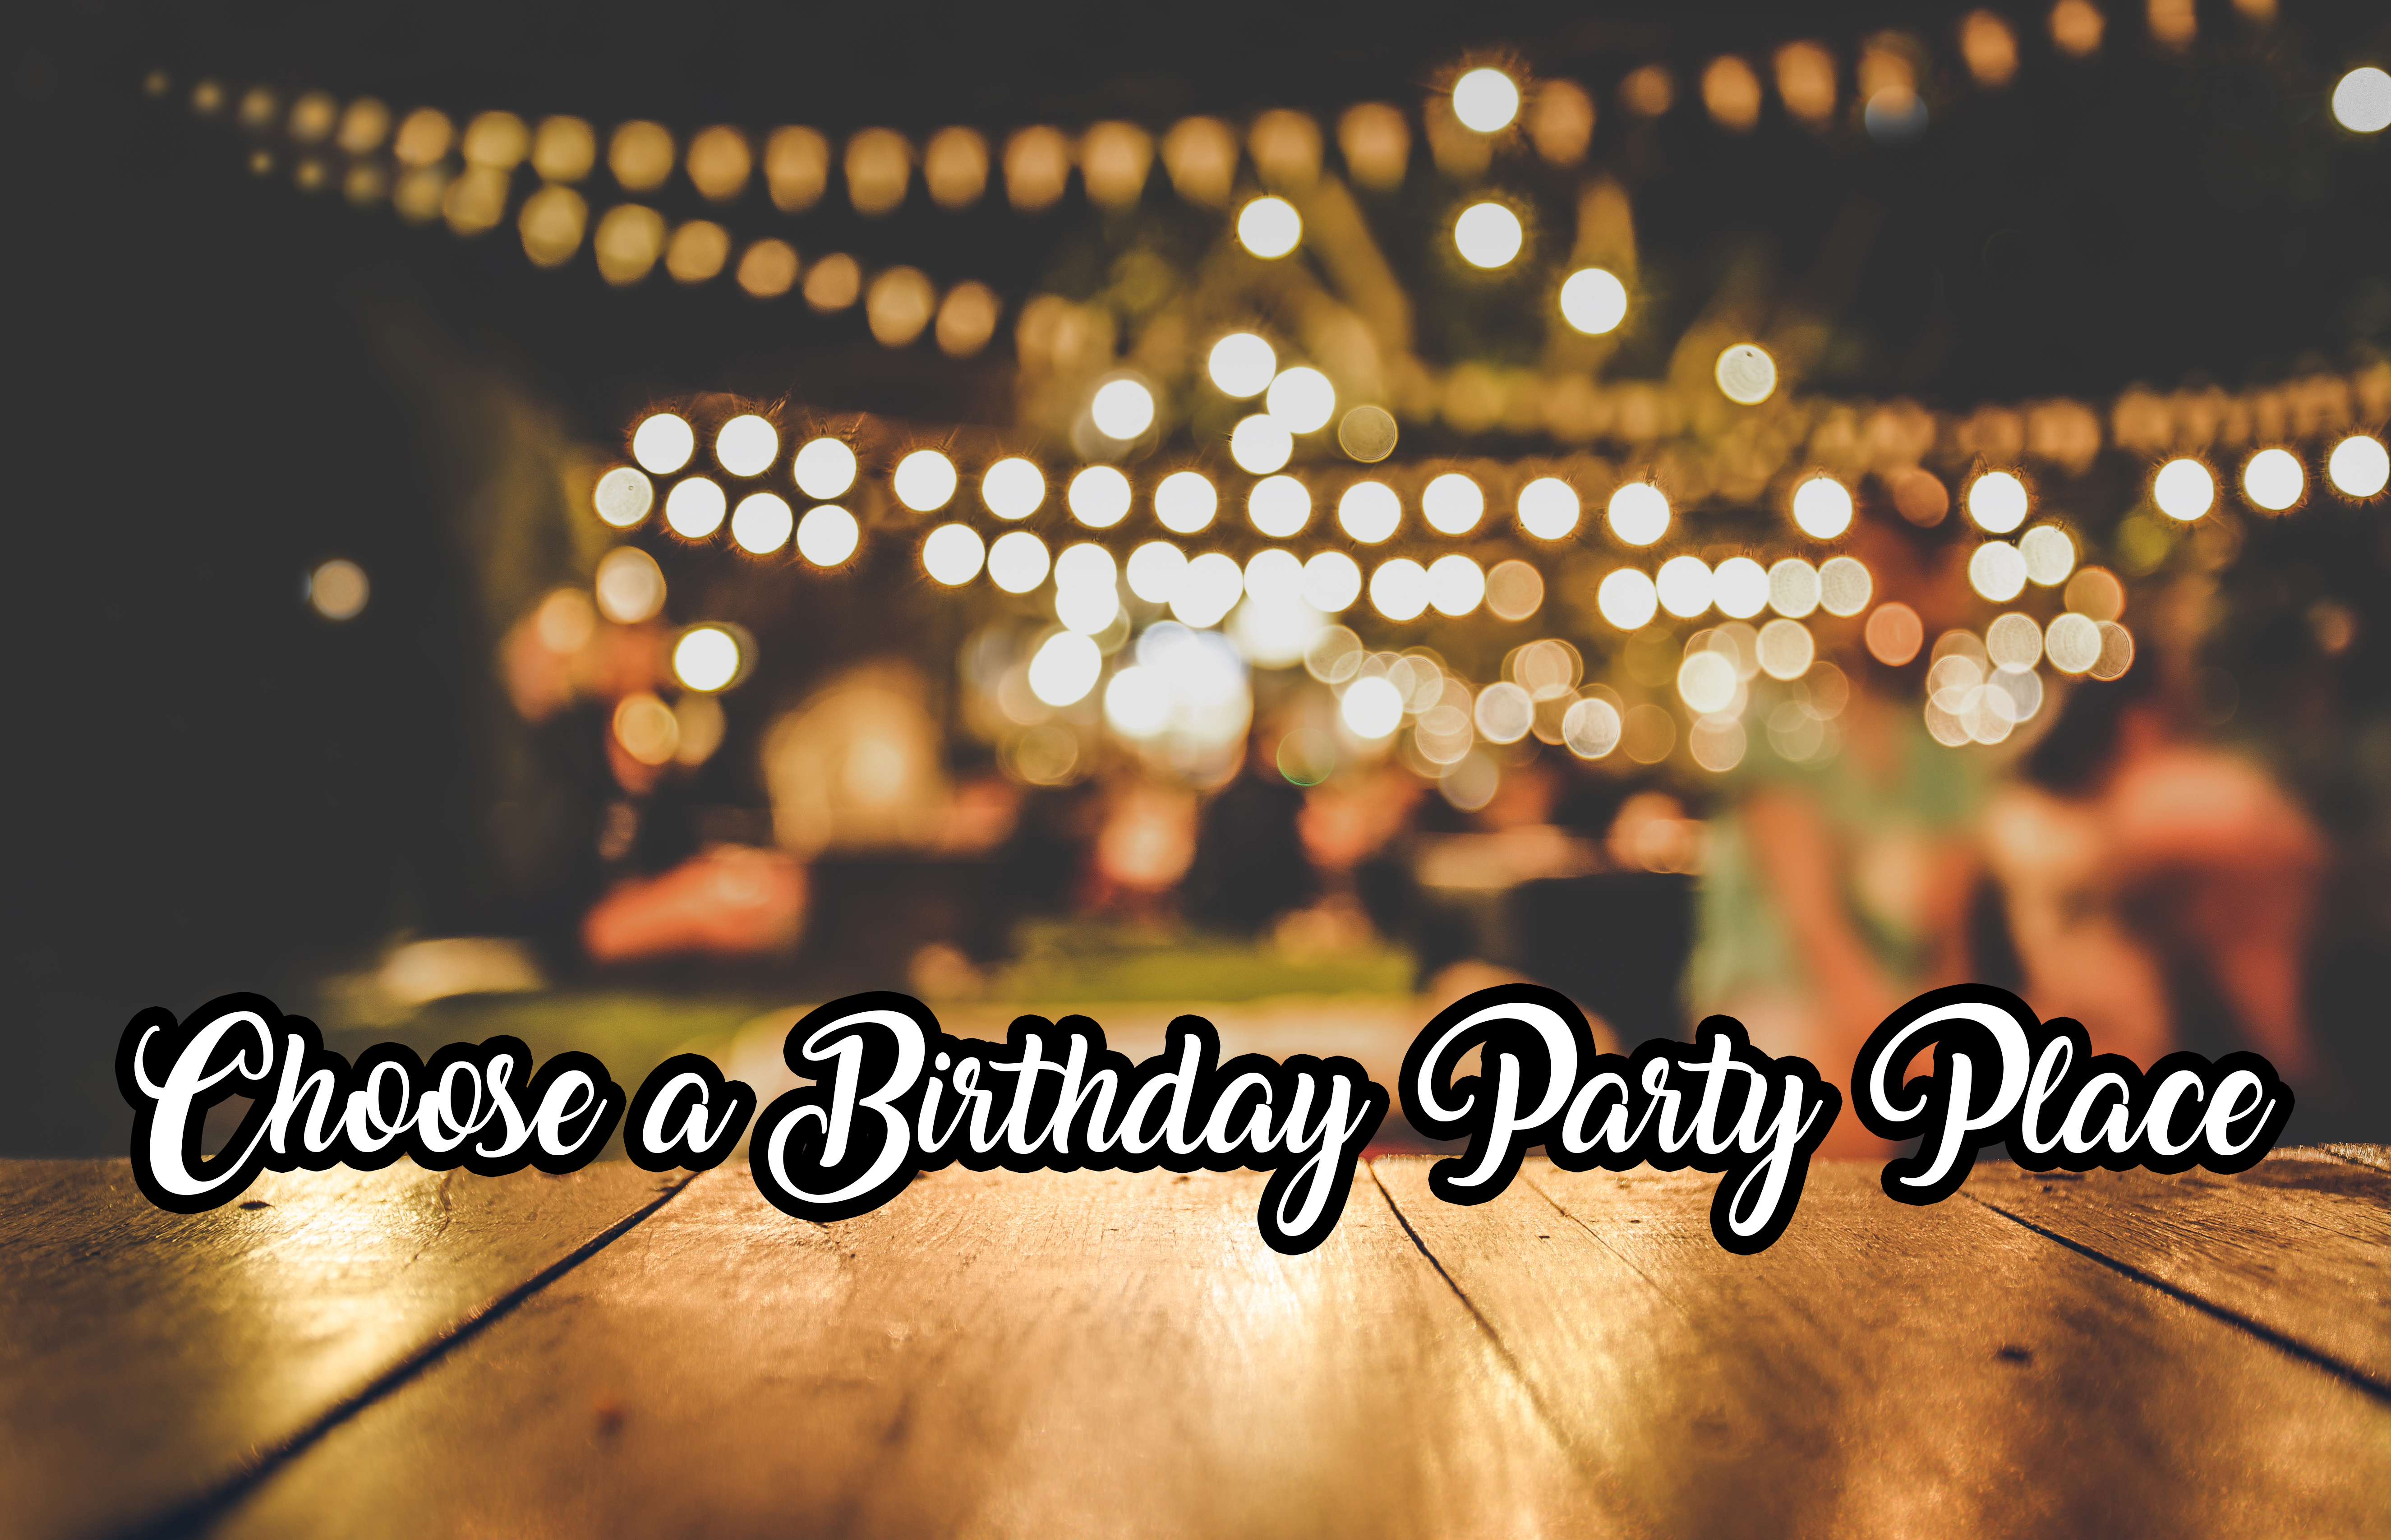 Choose a birthday party place - Inviter video invitation maker 